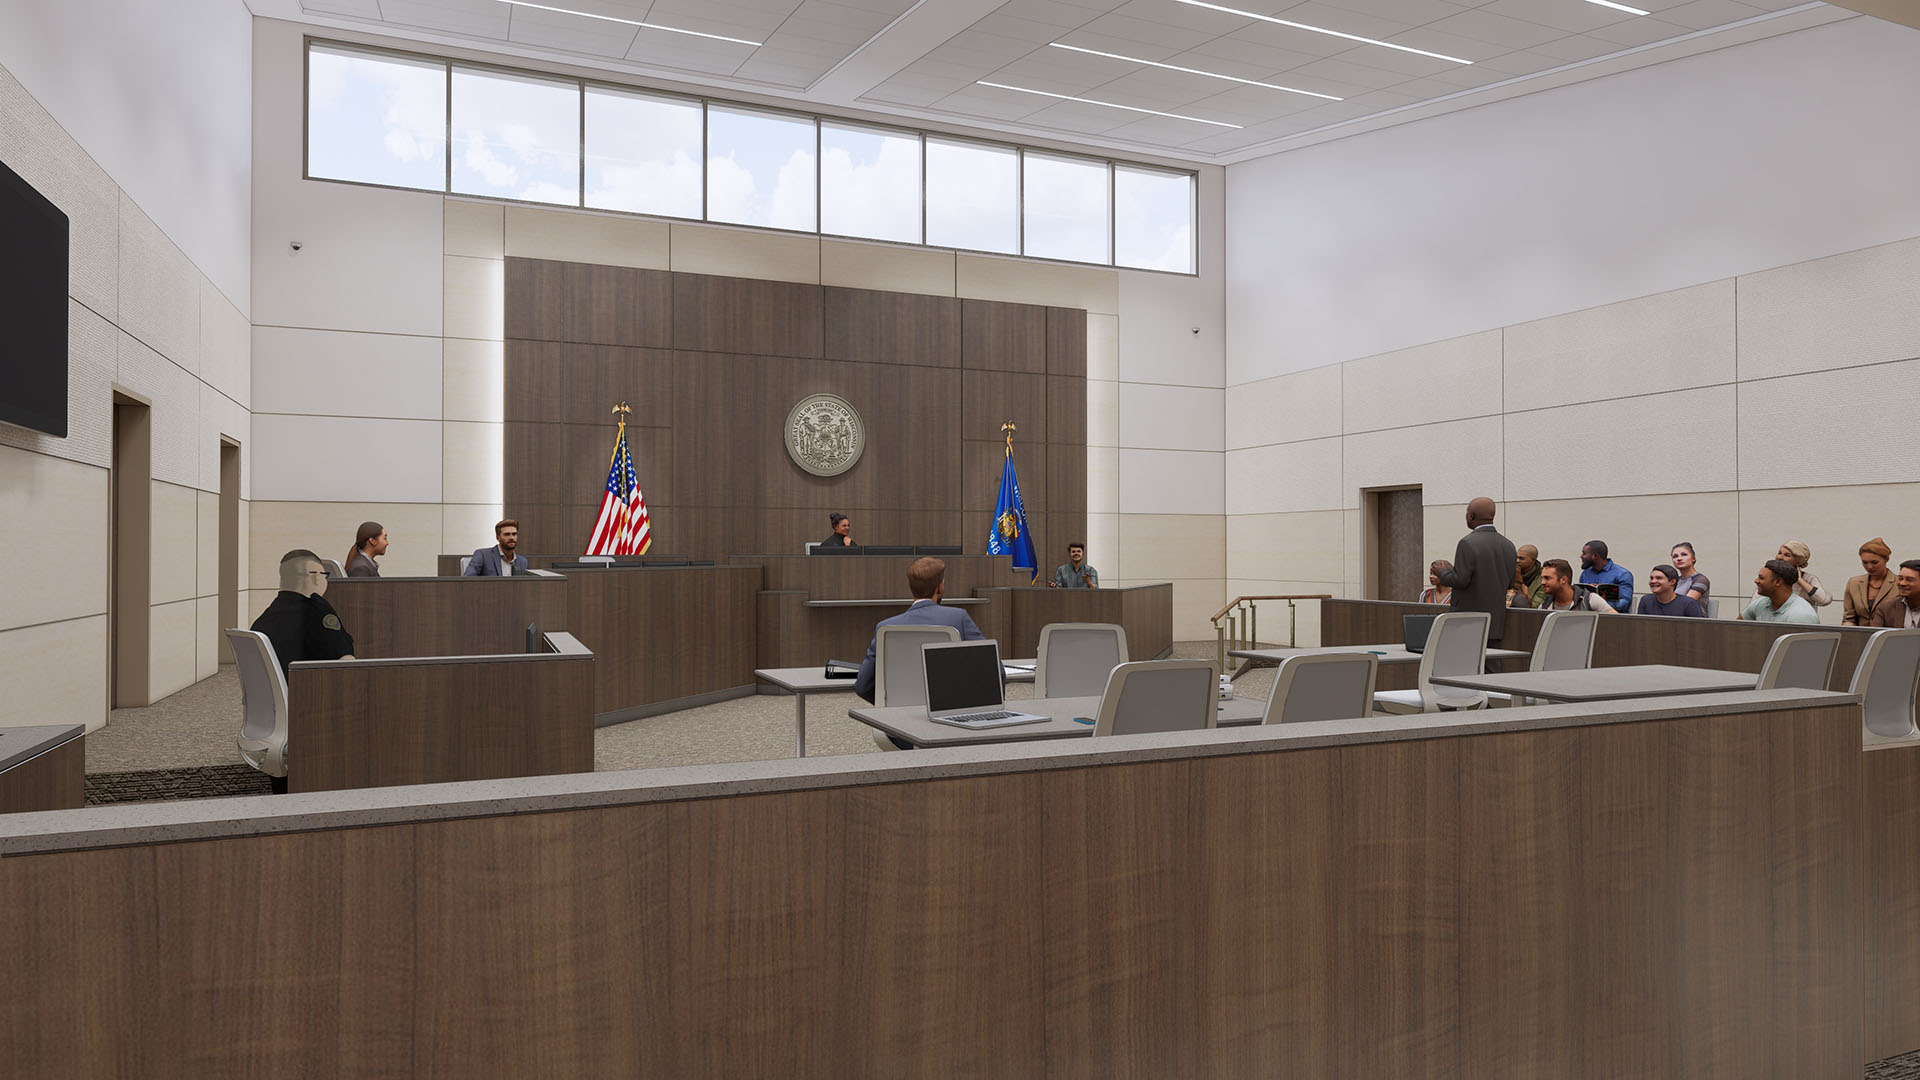 The Trempealeau County Justice Center courtroom.